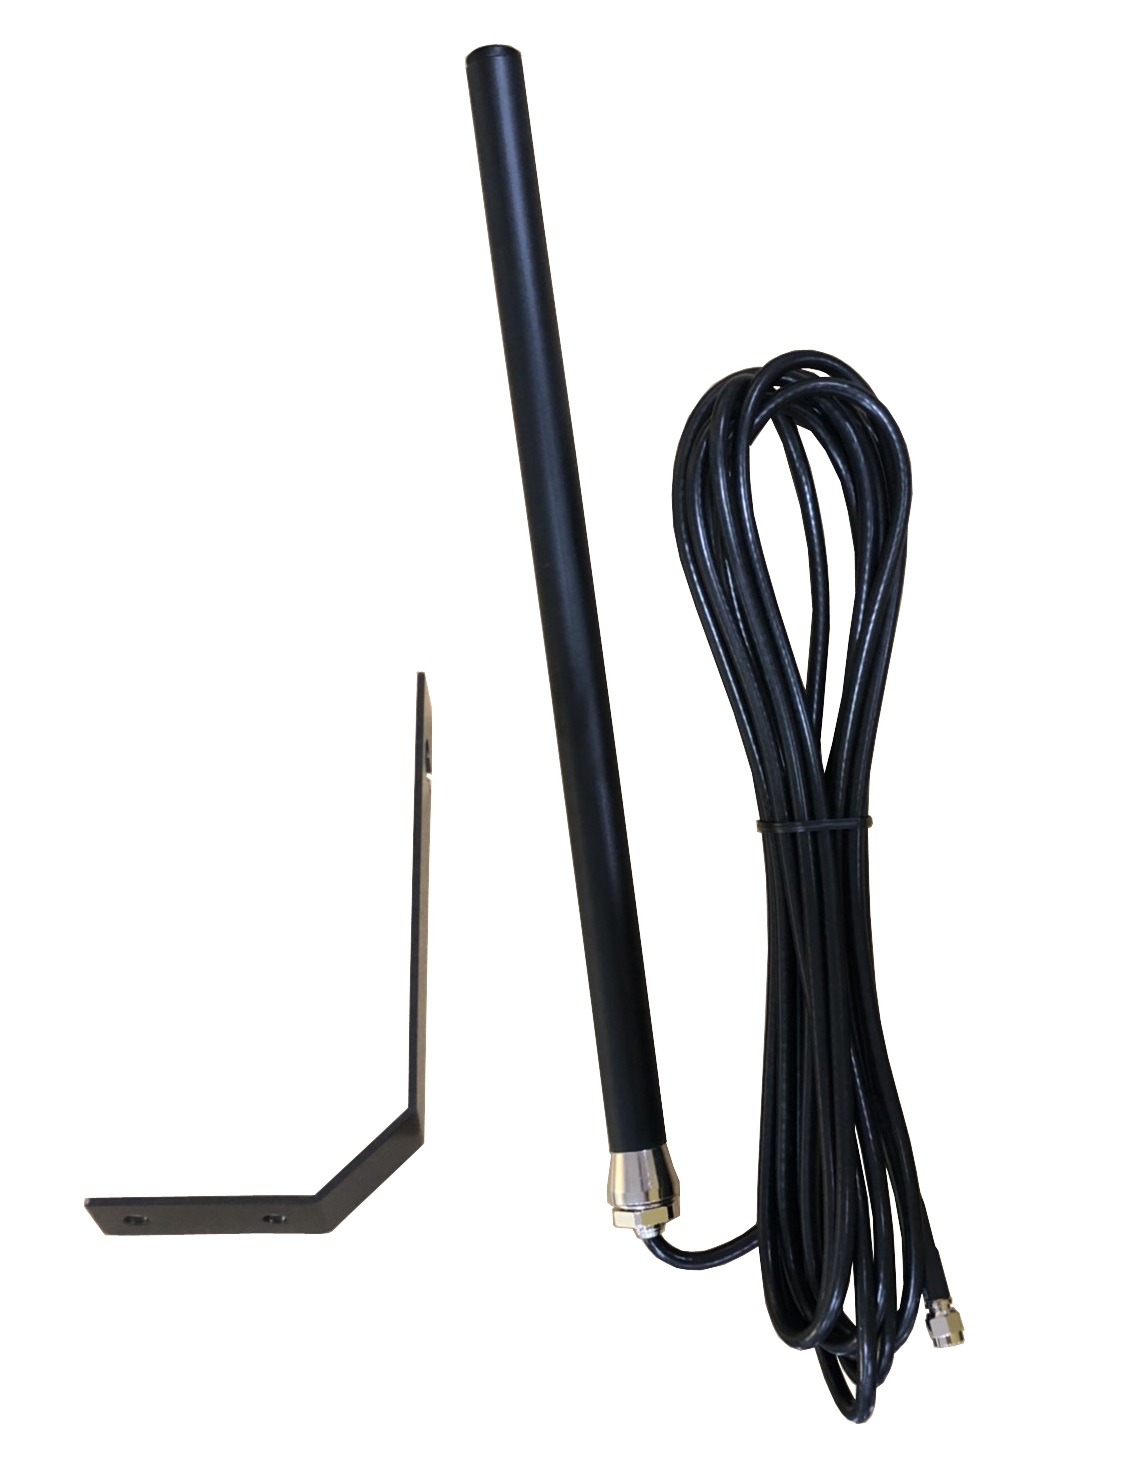 Bus OMNI Antenna for Body Parts System made by Chinmore Industry Co., LTD.　竣茂工業有限公司 - MatchSupplier.com